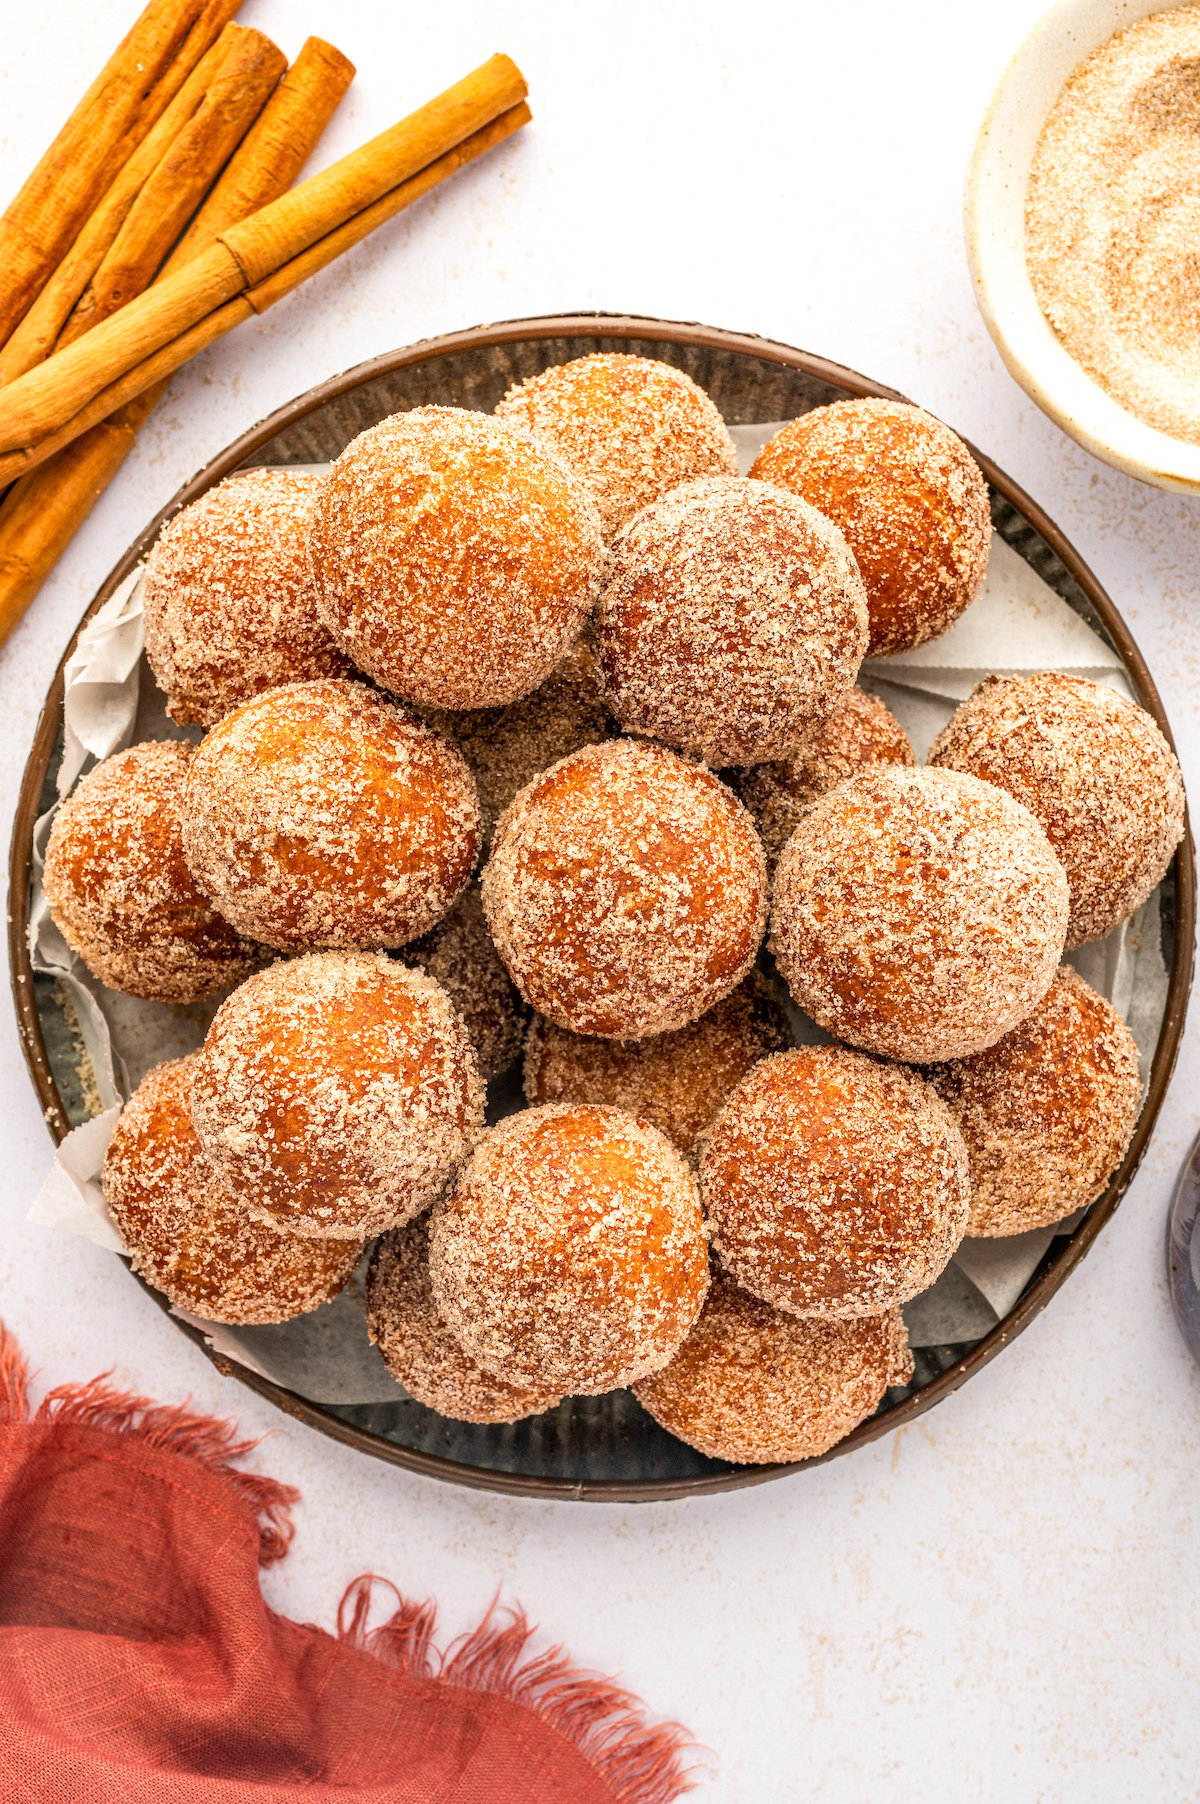 Homemade donut holes tossed in cinnamon sugar on a plate. 